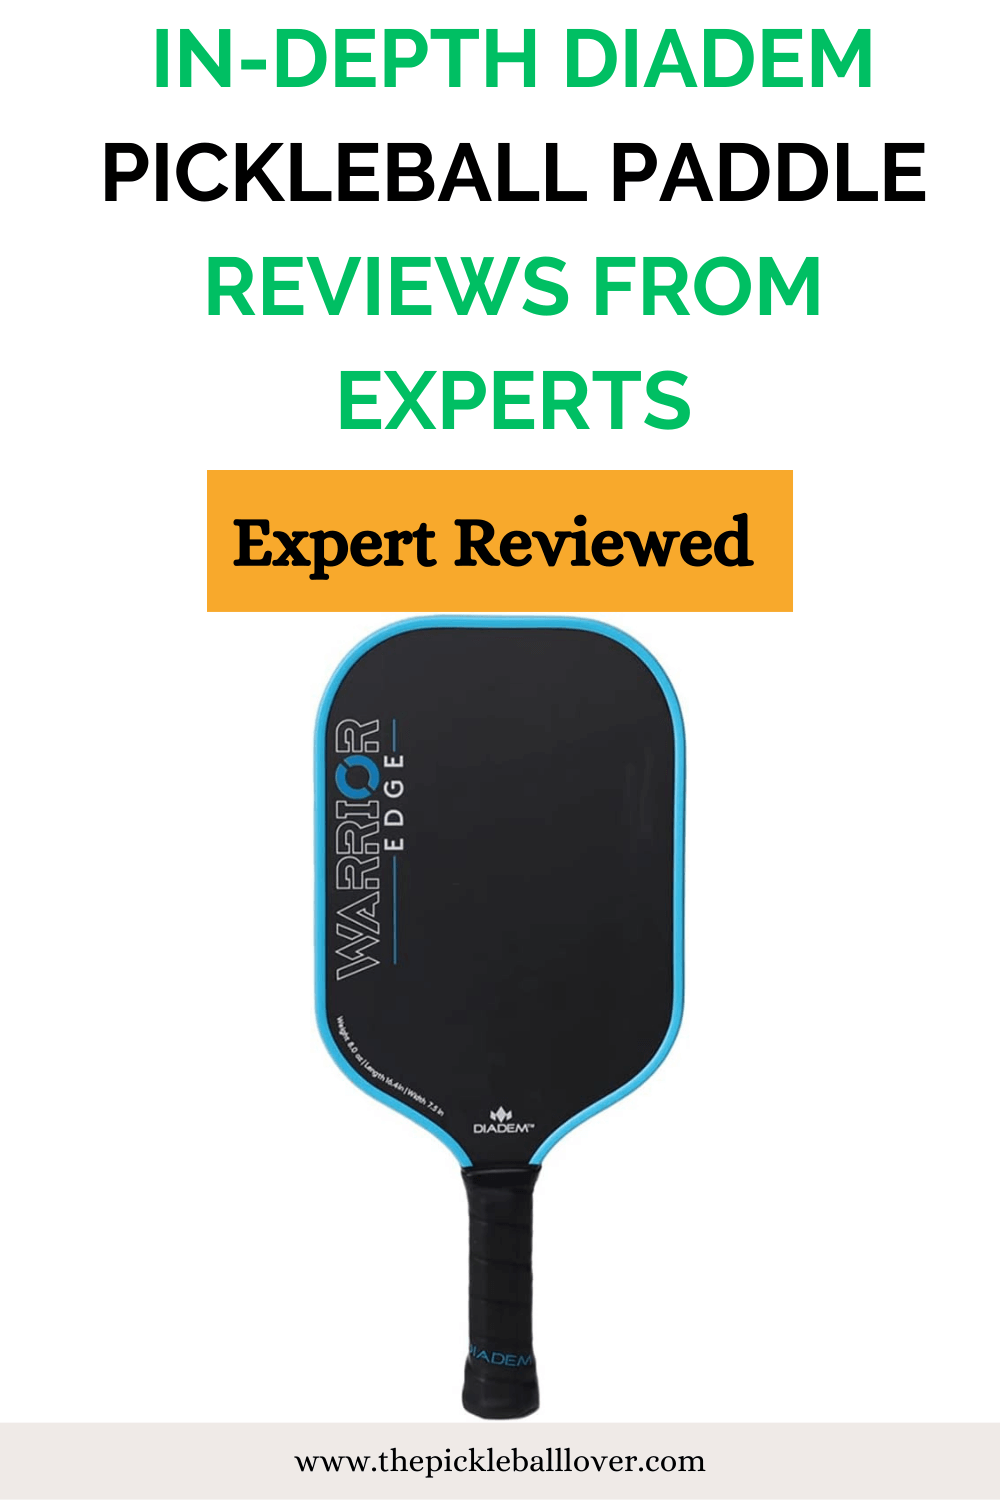 In-Depth Diadem Pickleball Paddle Reviews From Experts